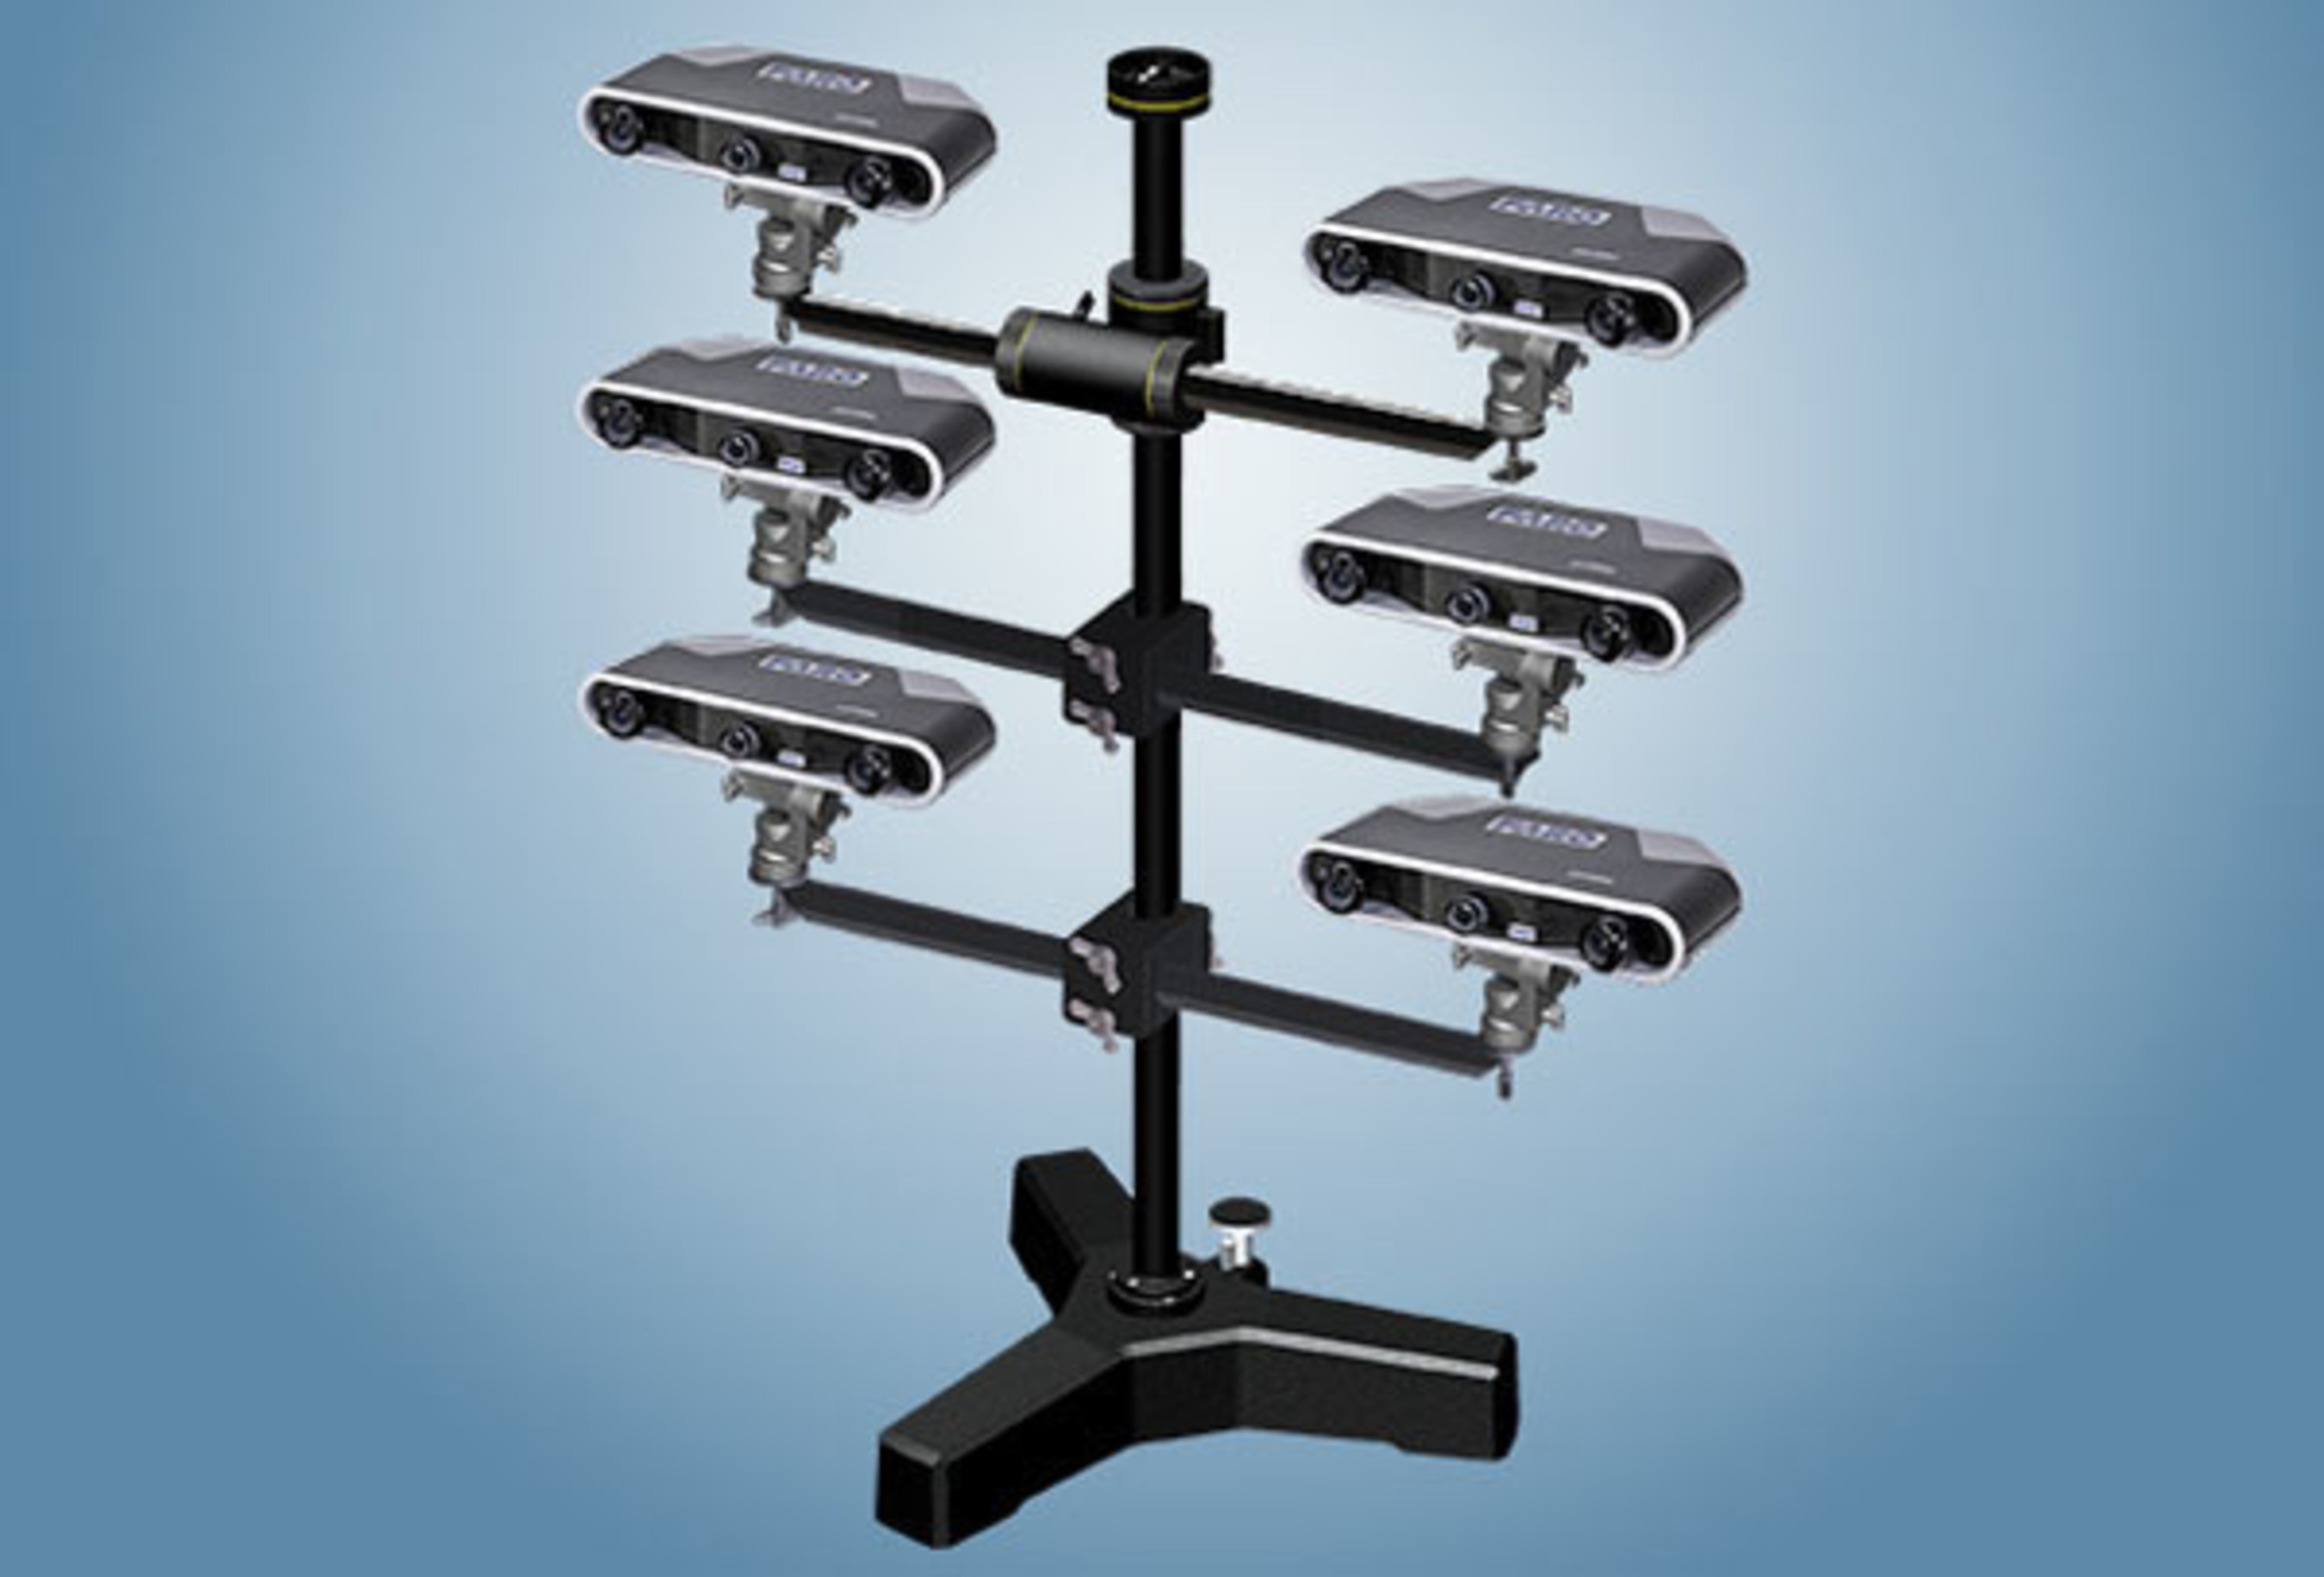 A multi-imager array - Six Cobalt sensors mounted in an array configuration